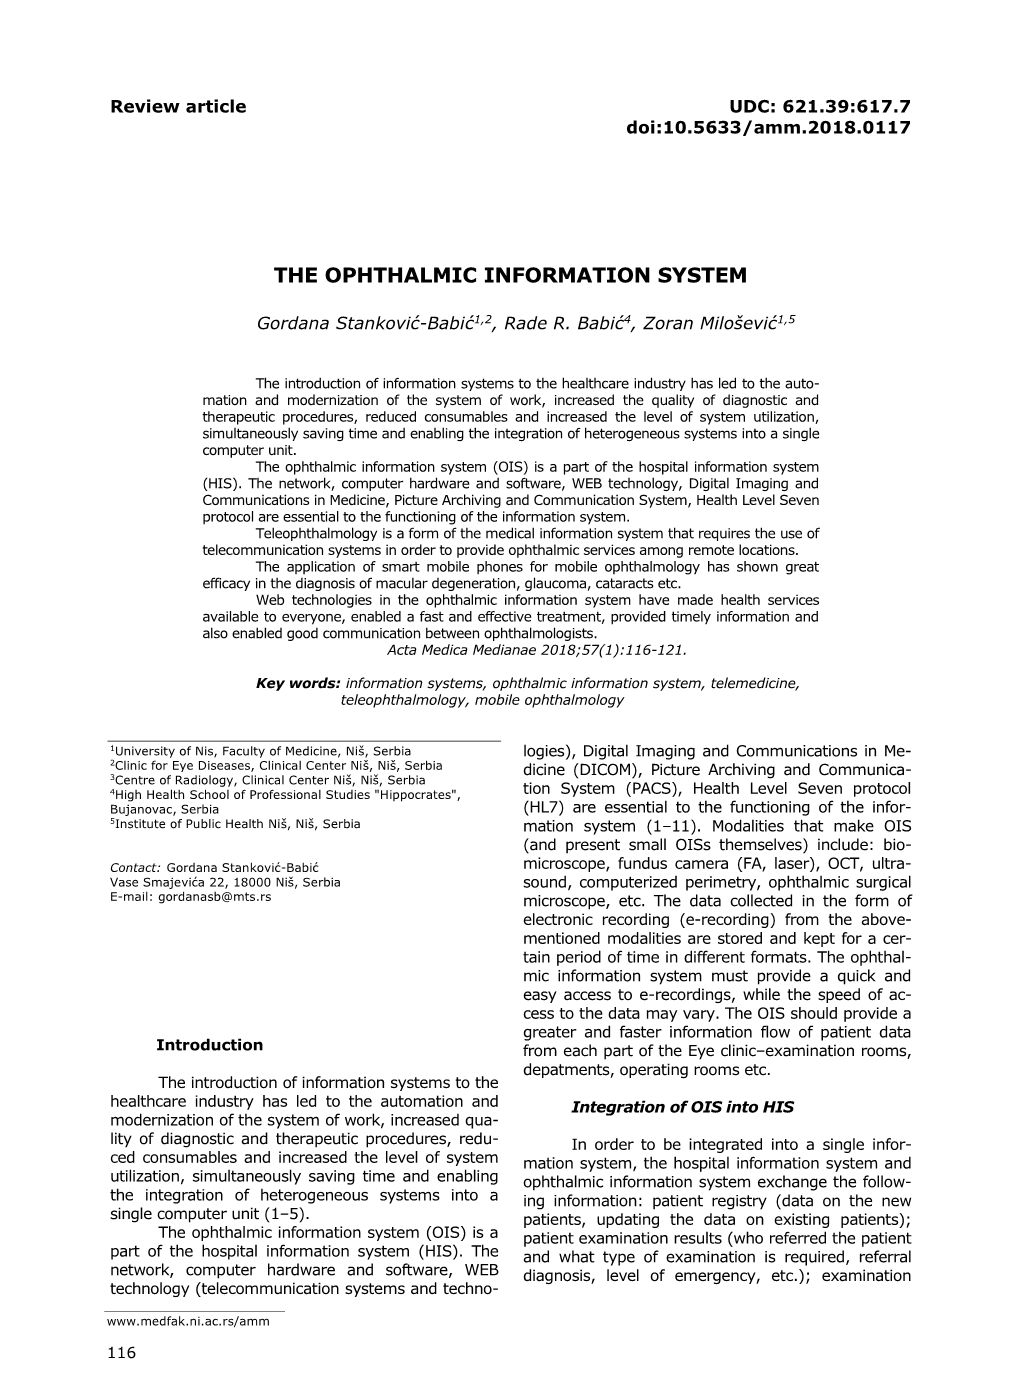 The Ophthalmic Information System